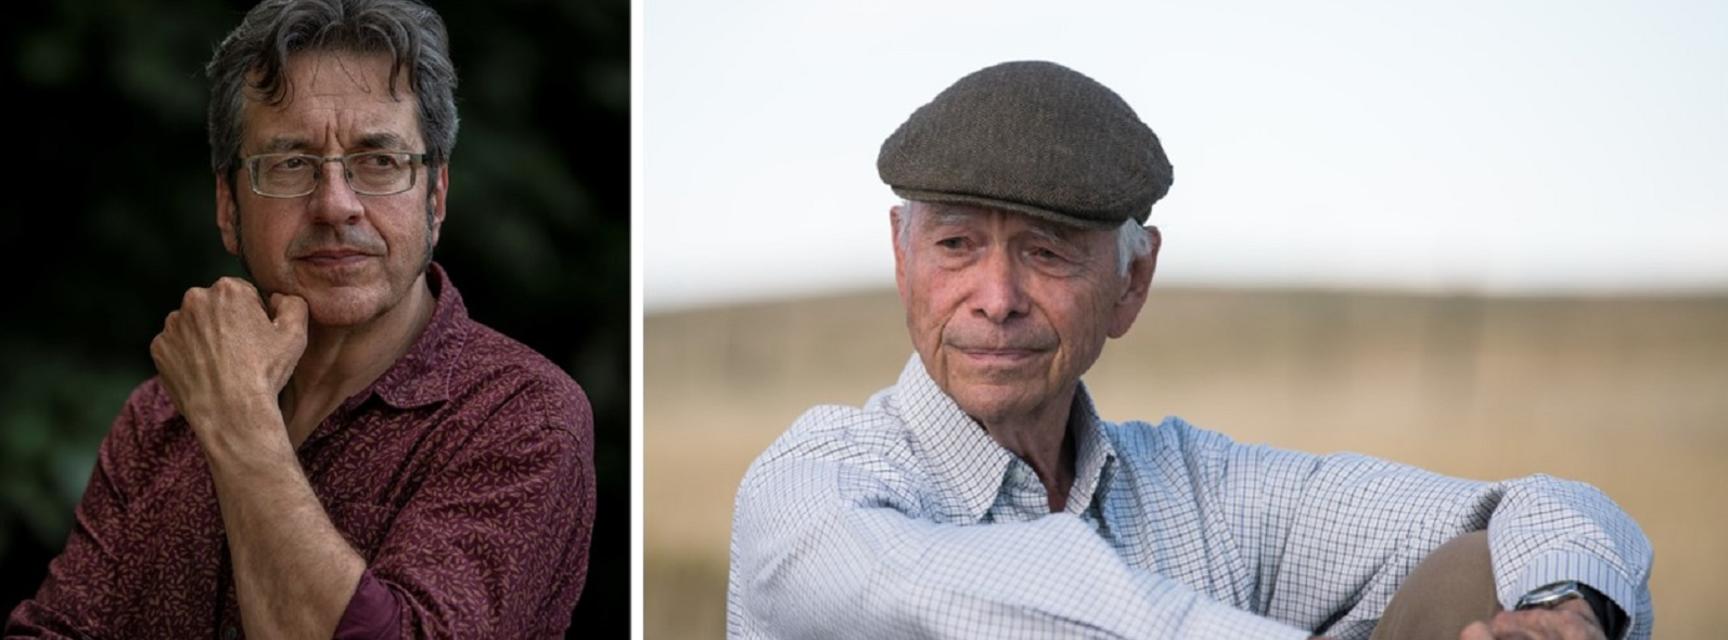 Two side-by-side photographic portraits of George Monbiot and Allan Savory